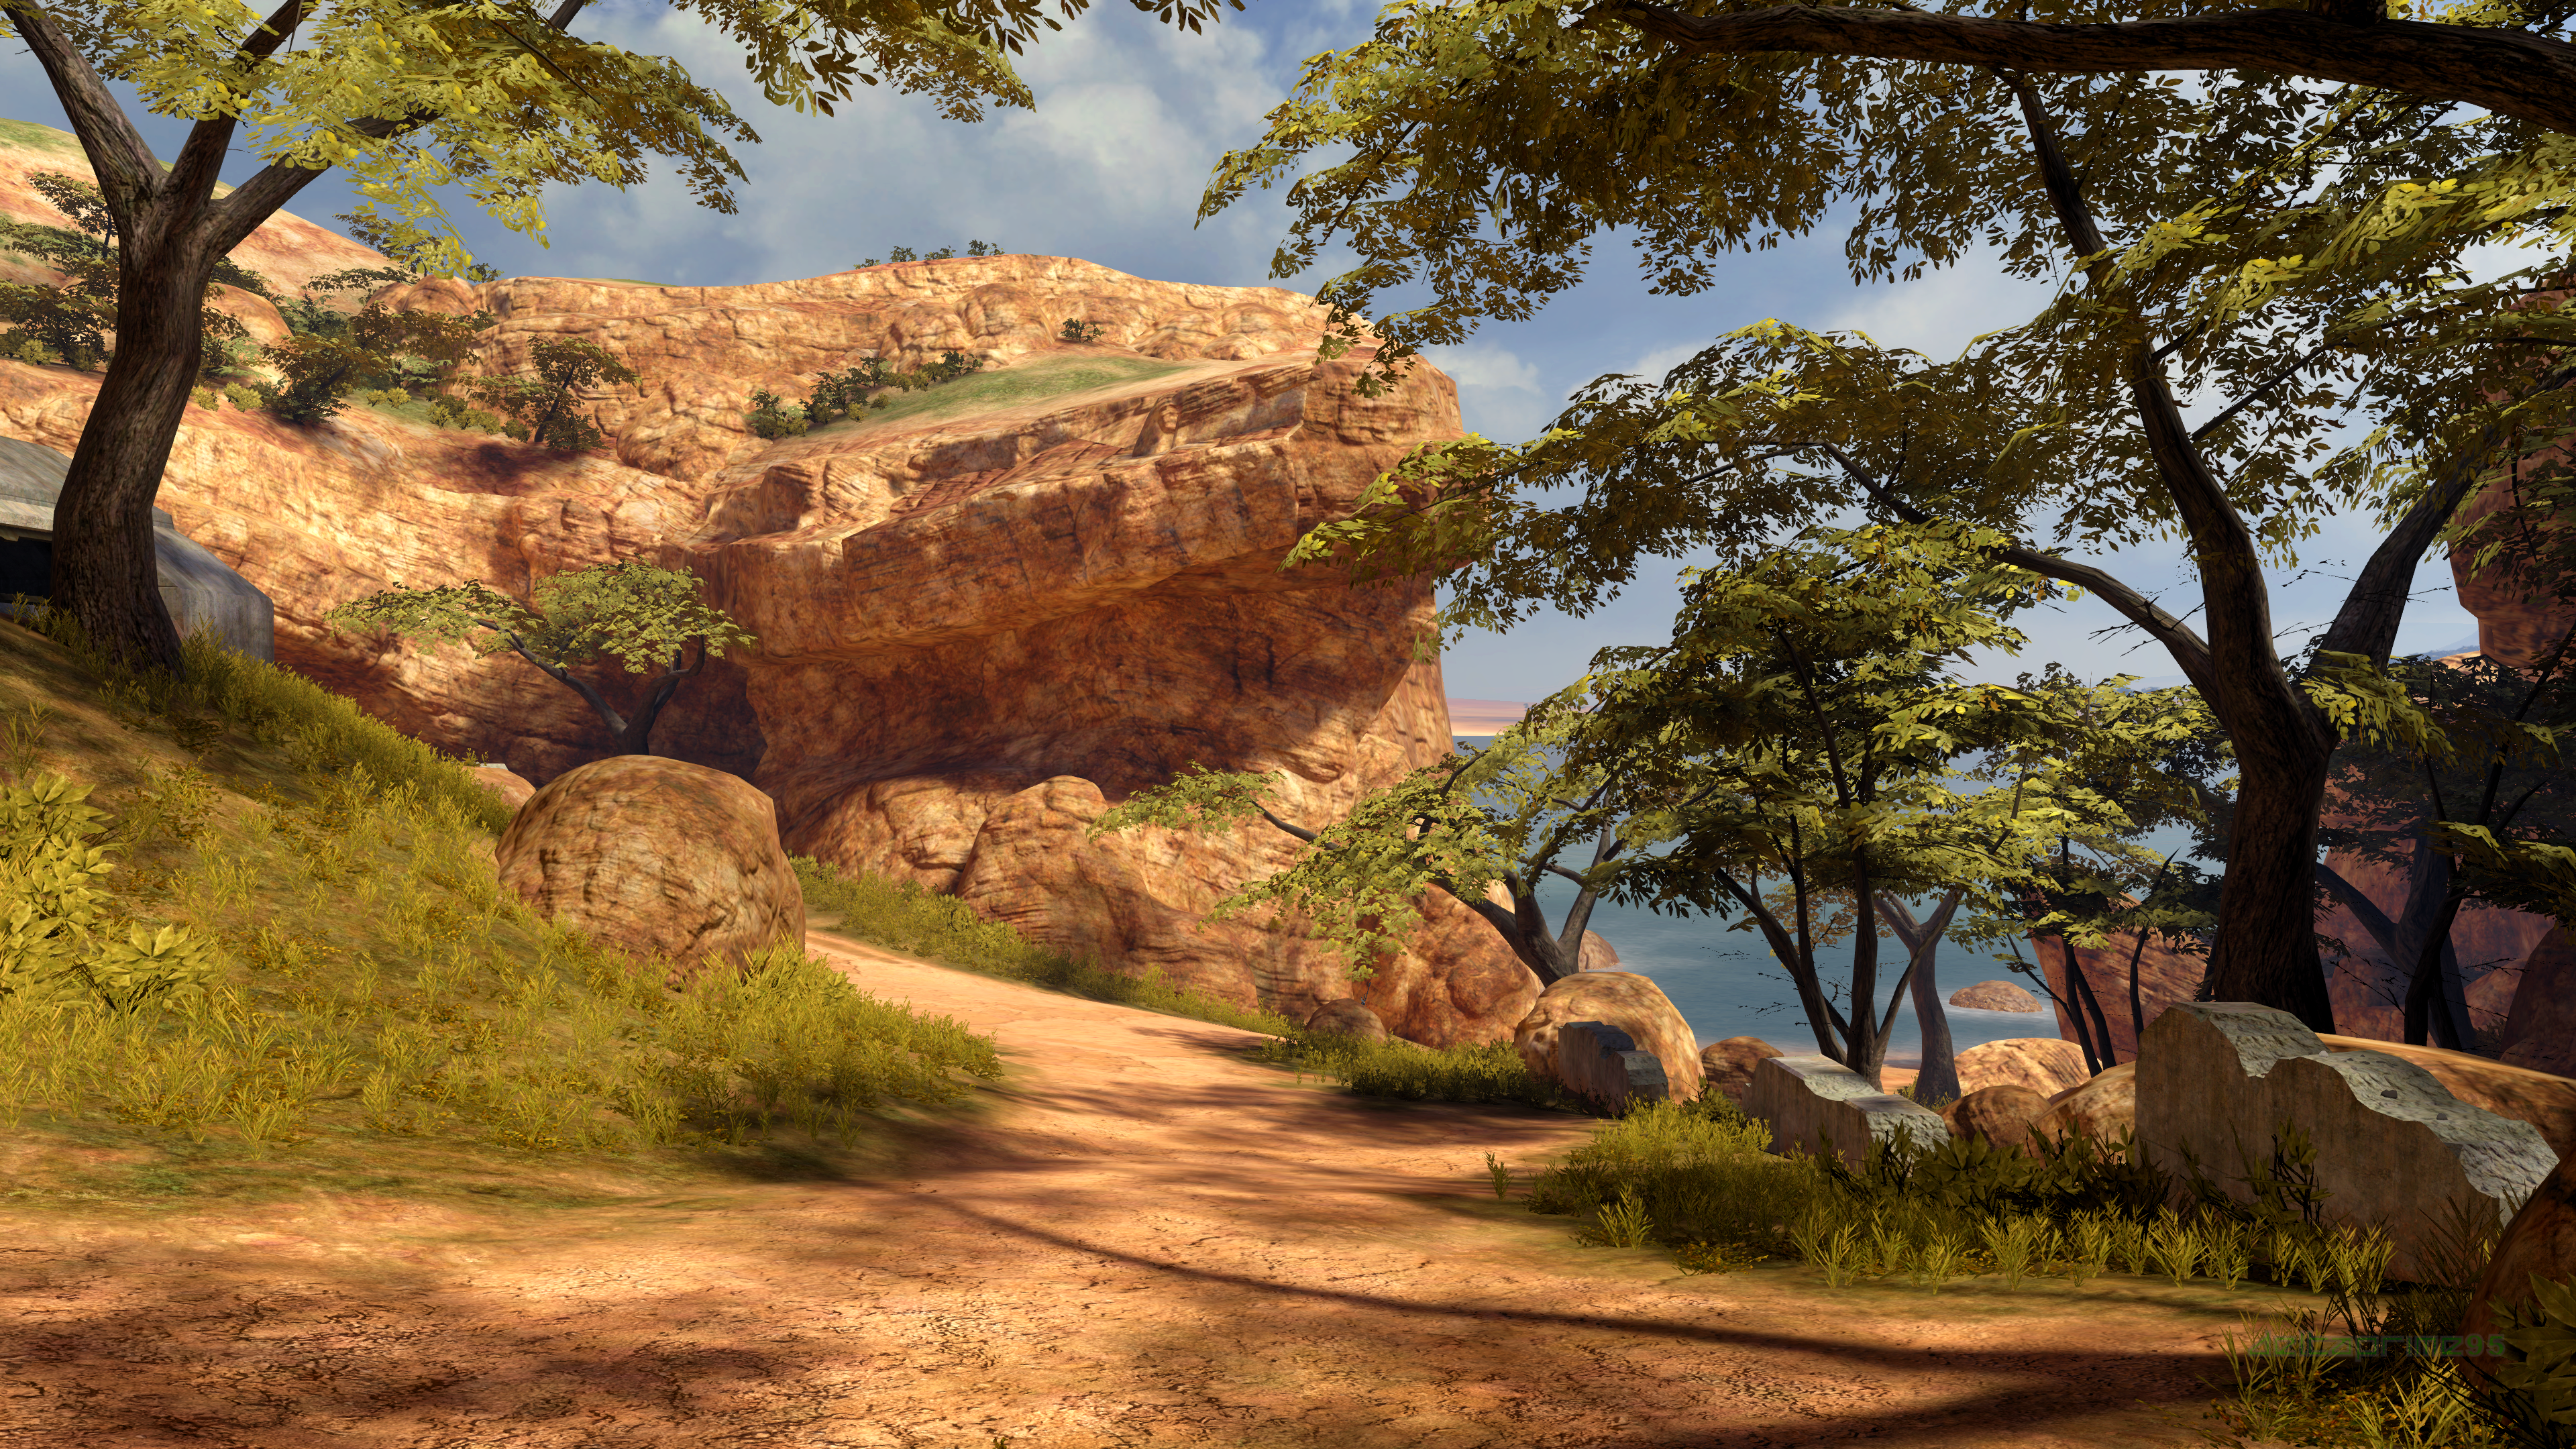 General 3840x2160 screen shot PC gaming Halo 3 High Ground (Multiplayer Map) Africa water ocean view trees